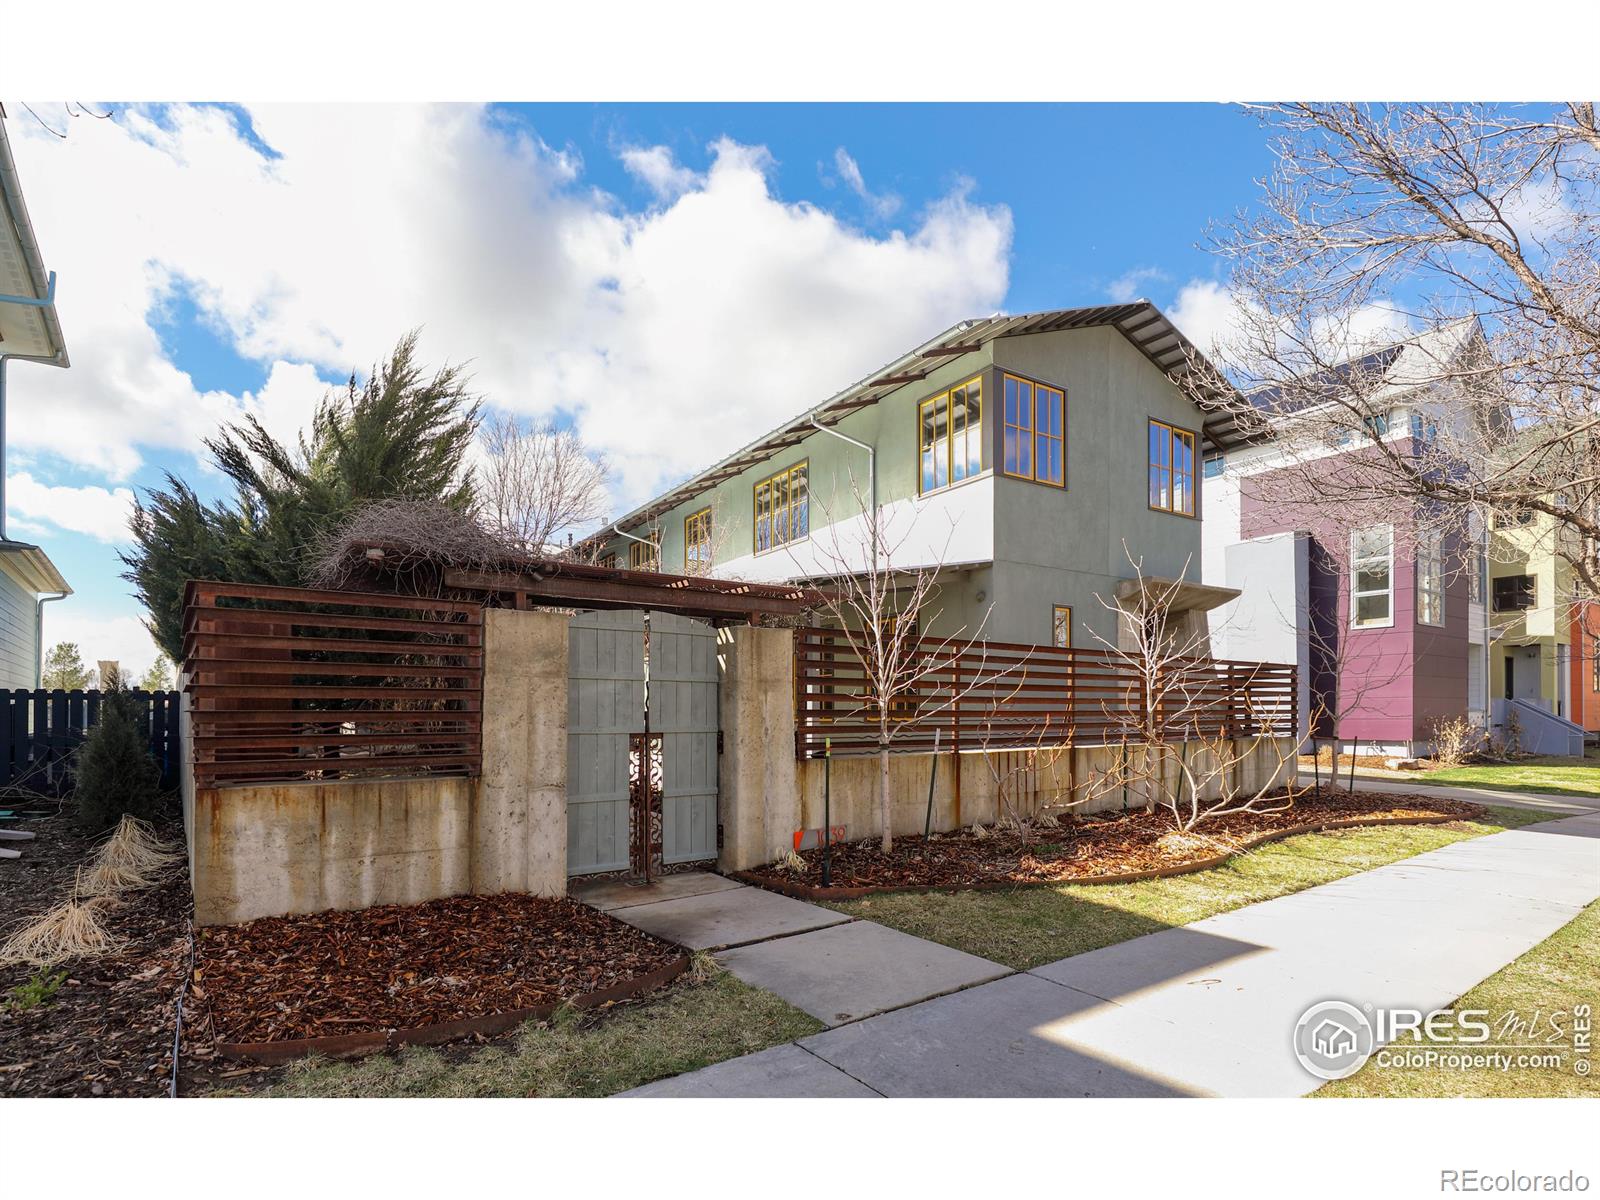 1039  Neon Forest Circle, longmont MLS: 4567891006699 Beds: 5 Baths: 5 Price: $1,499,500